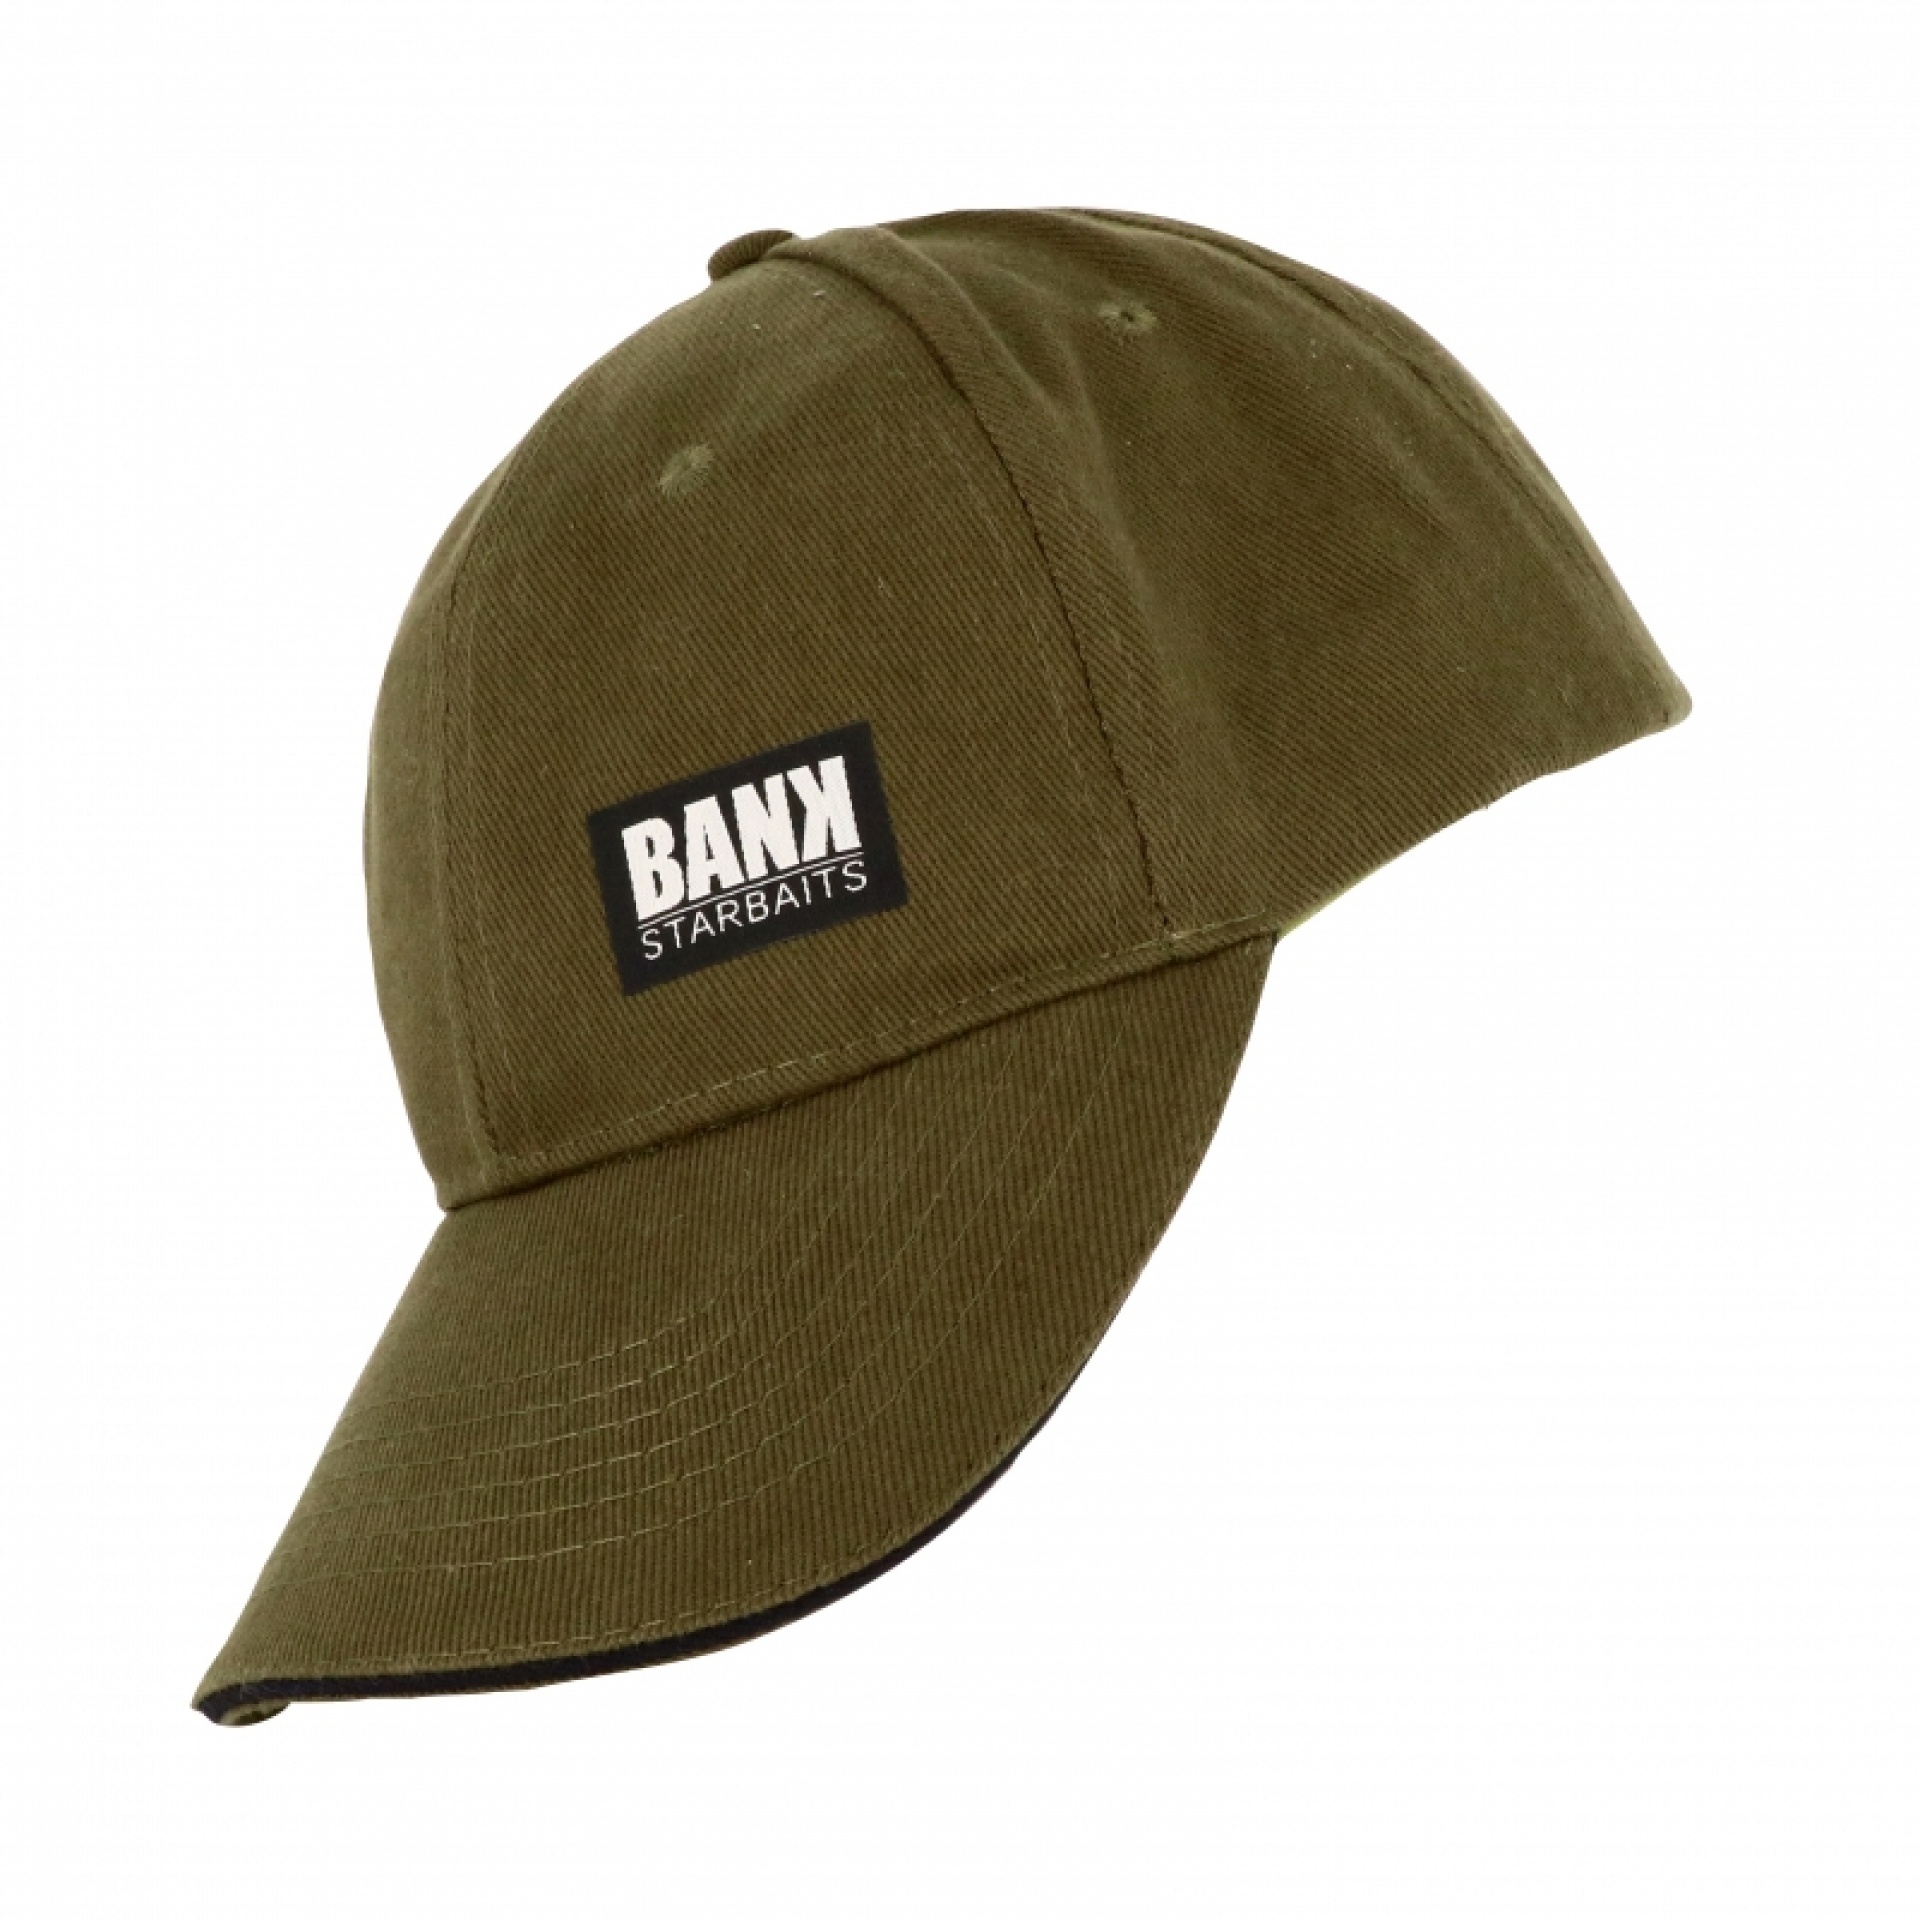 Starbaits Bank 5 Panel Cap Olive Green